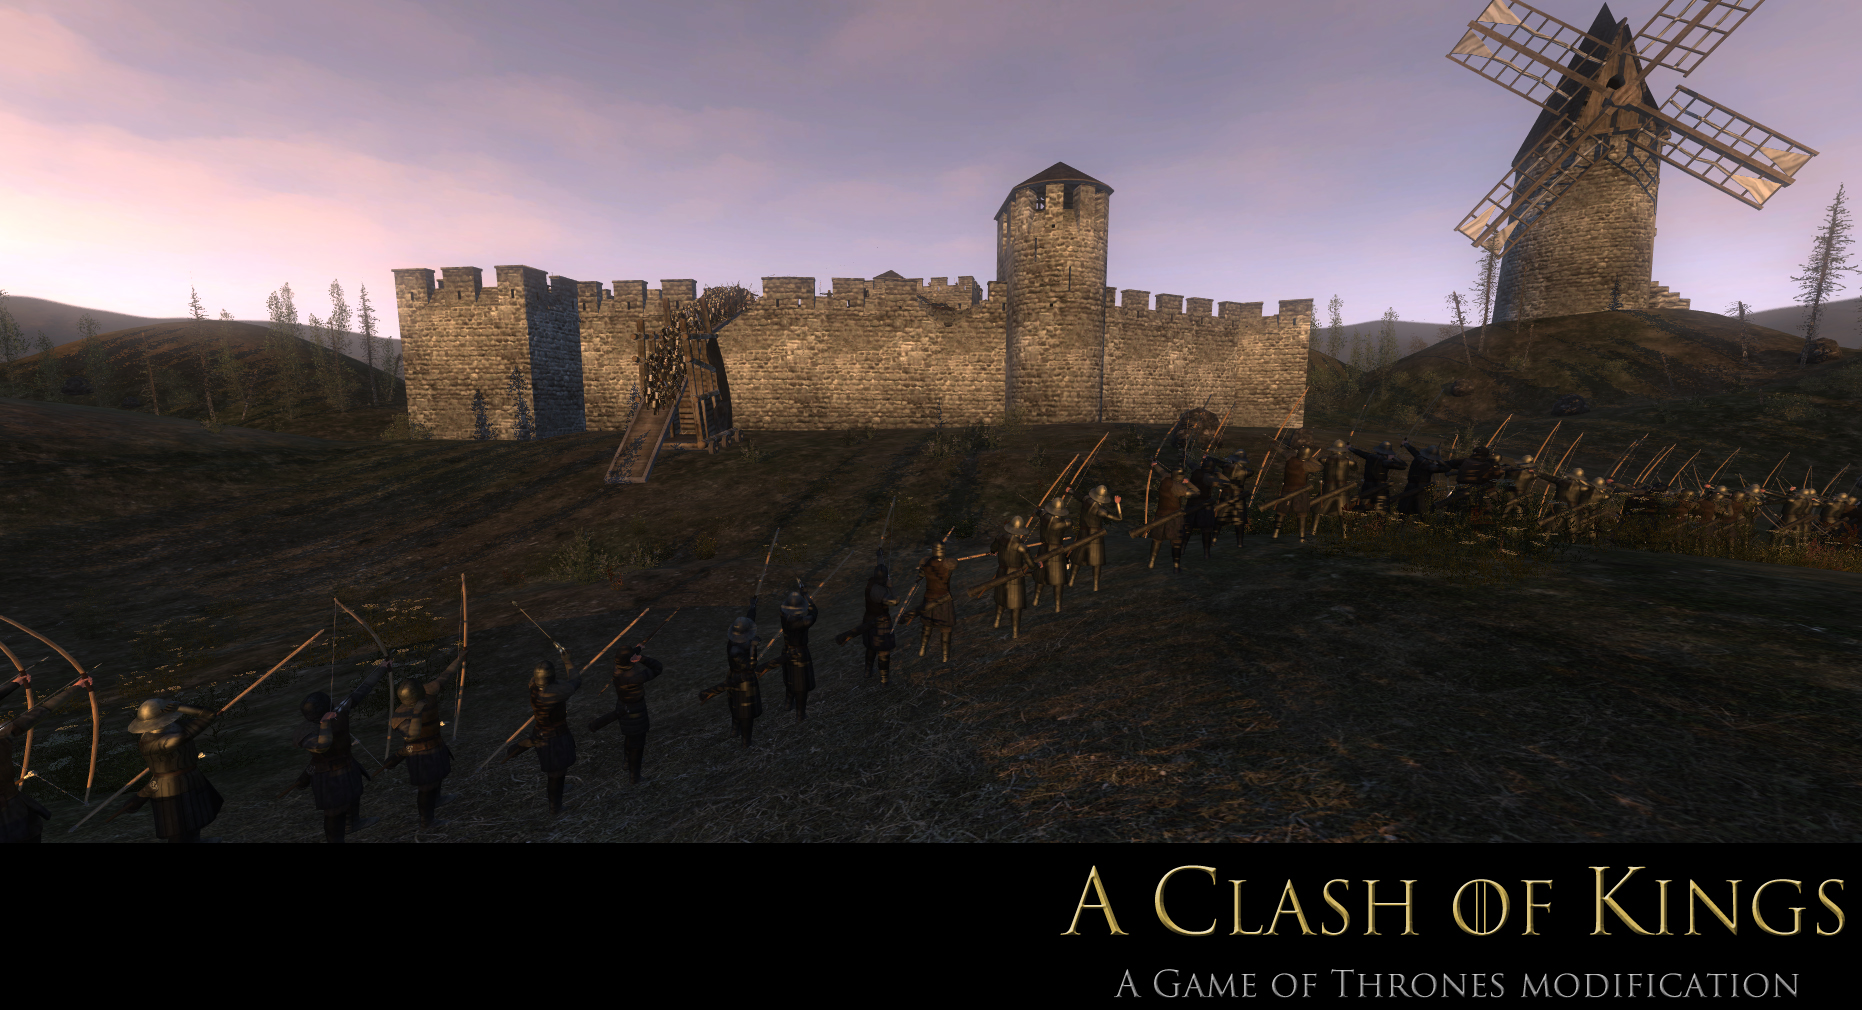 Warband король. Mount and Blade Clash of Kings. Маунт блейд a Clash of Kings. Mount and Blade: Warband – a Clash of Kings.